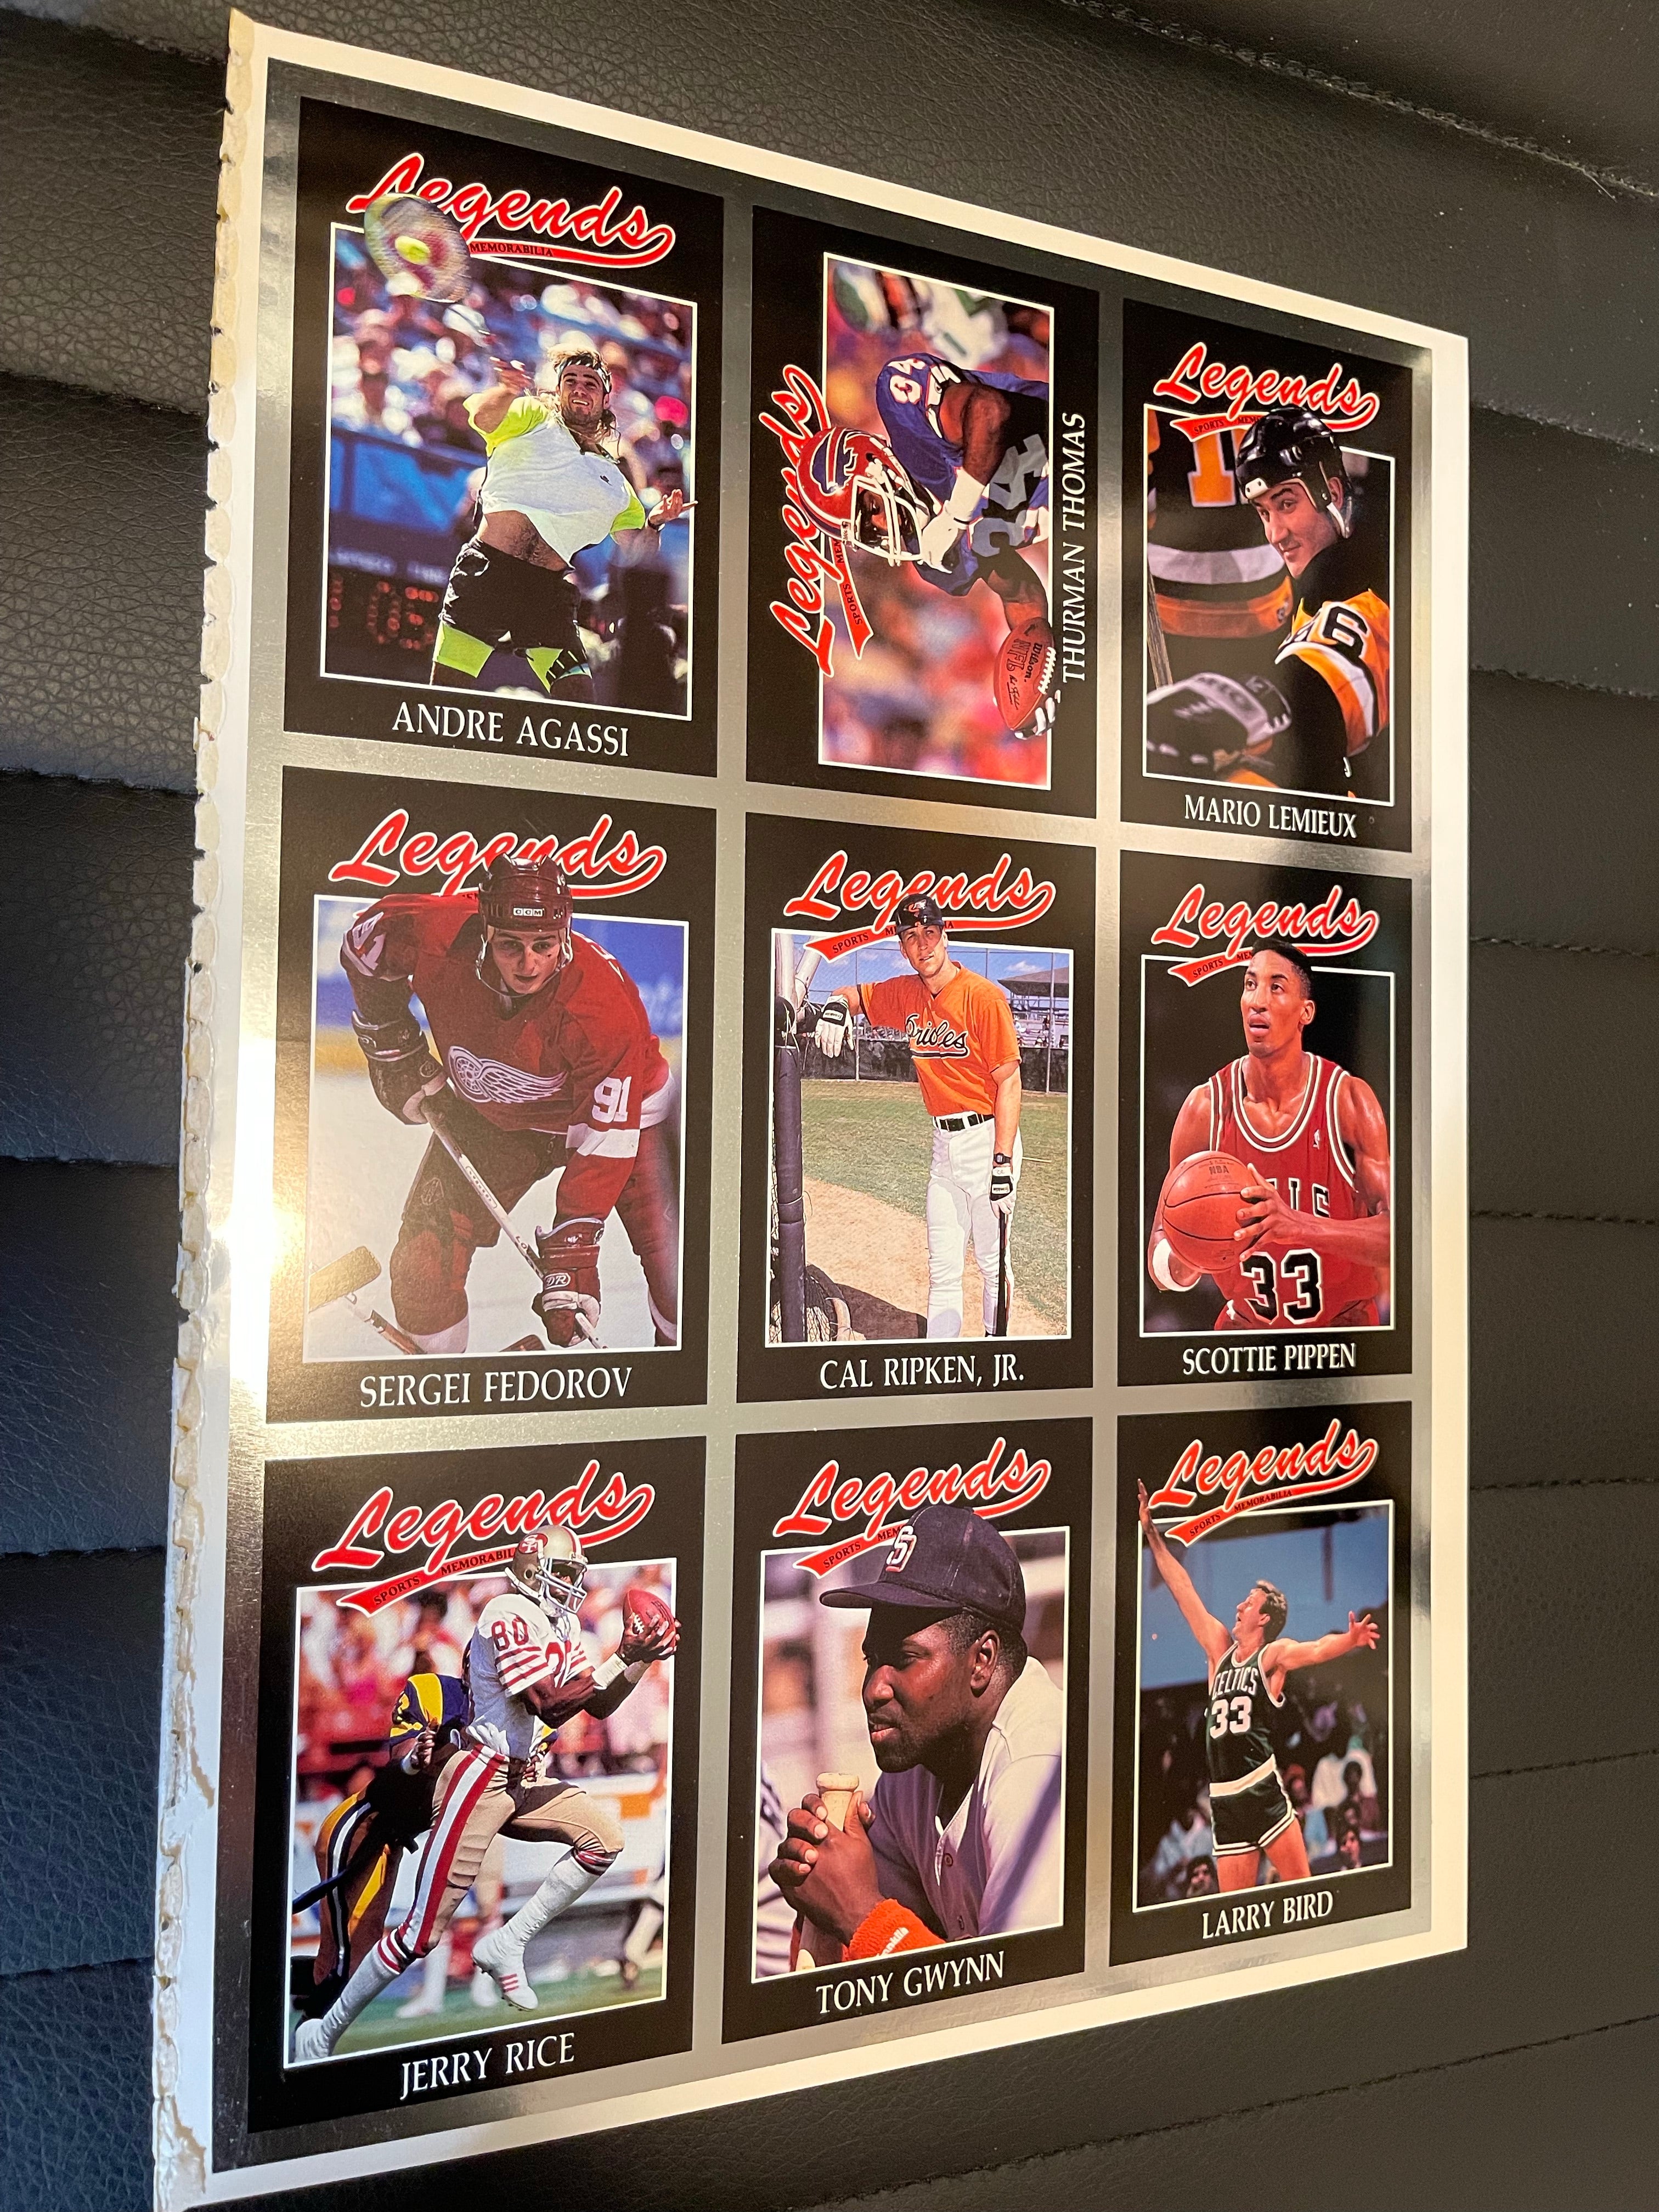 Legends sports cards uncut sheet ,Larry Bird, Lemieux and Andre Agassi and more